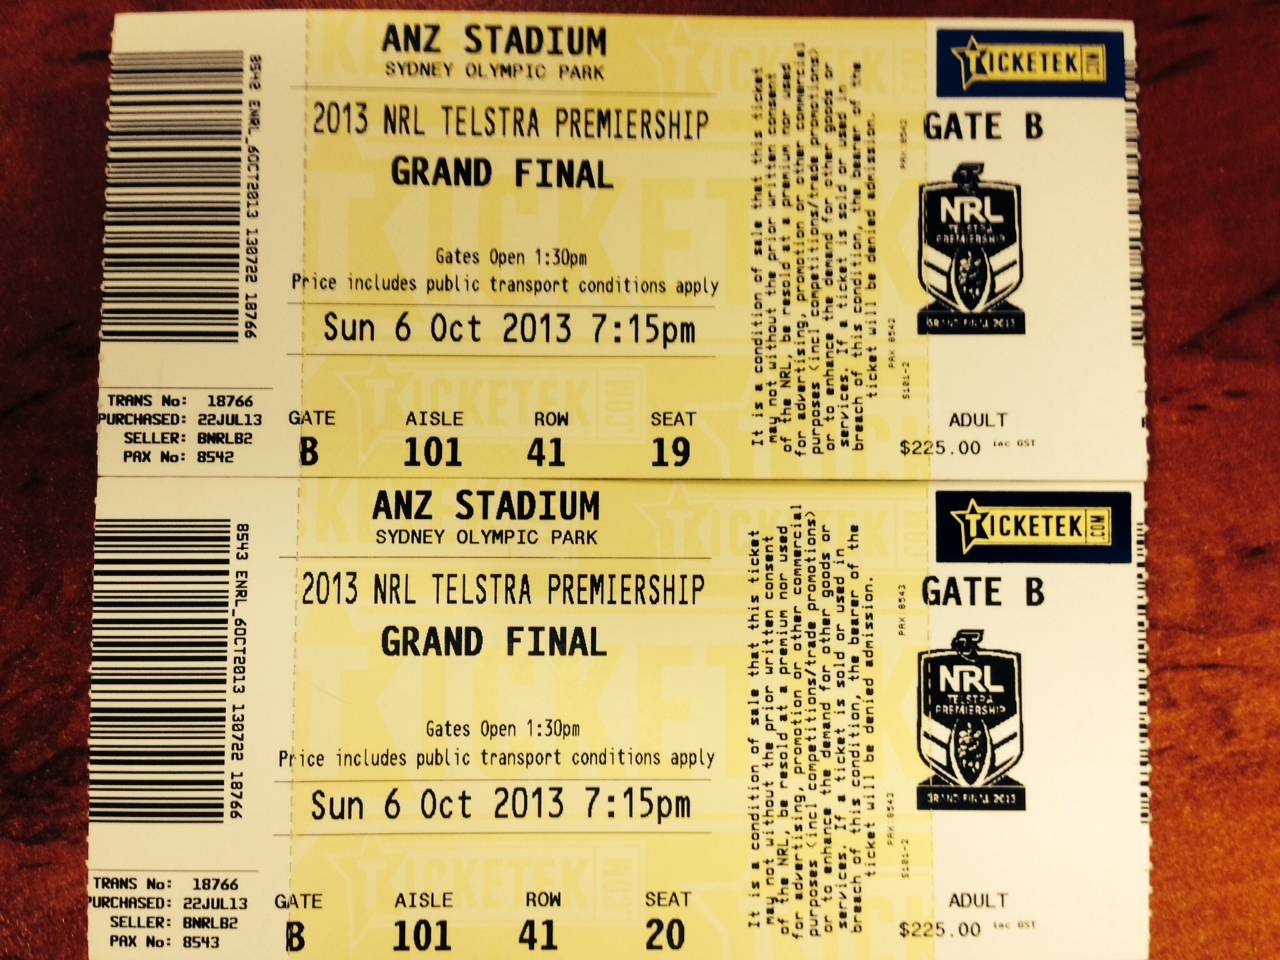 Last chance to bid on two NRL 2013 Grand Final tickets